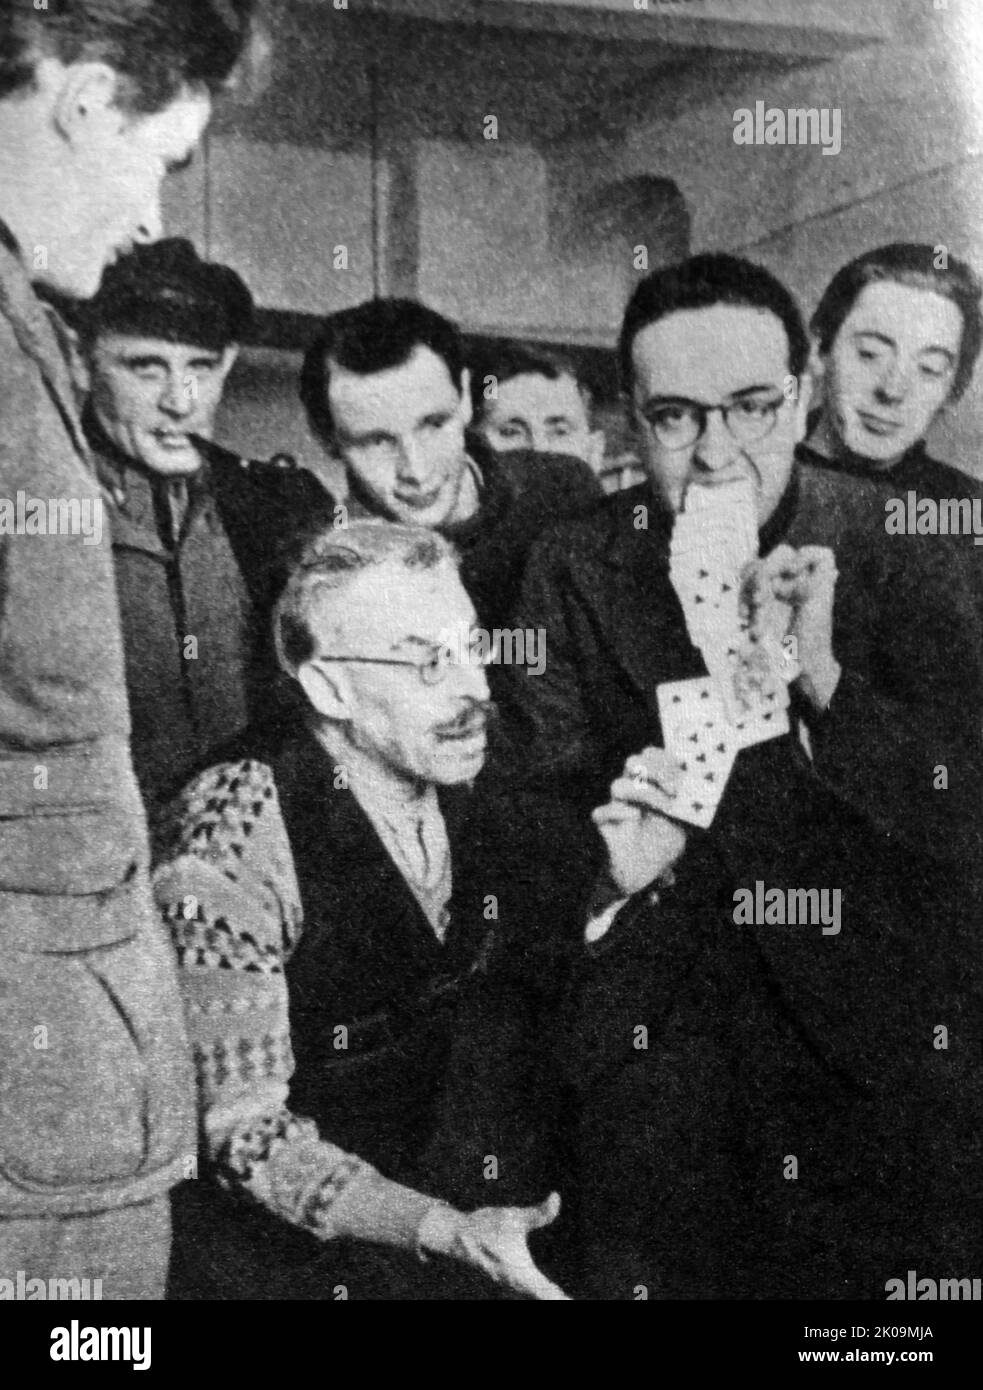 Frenchman playing card tricks in a German prisoner of war camp during World War II. Stock Photo